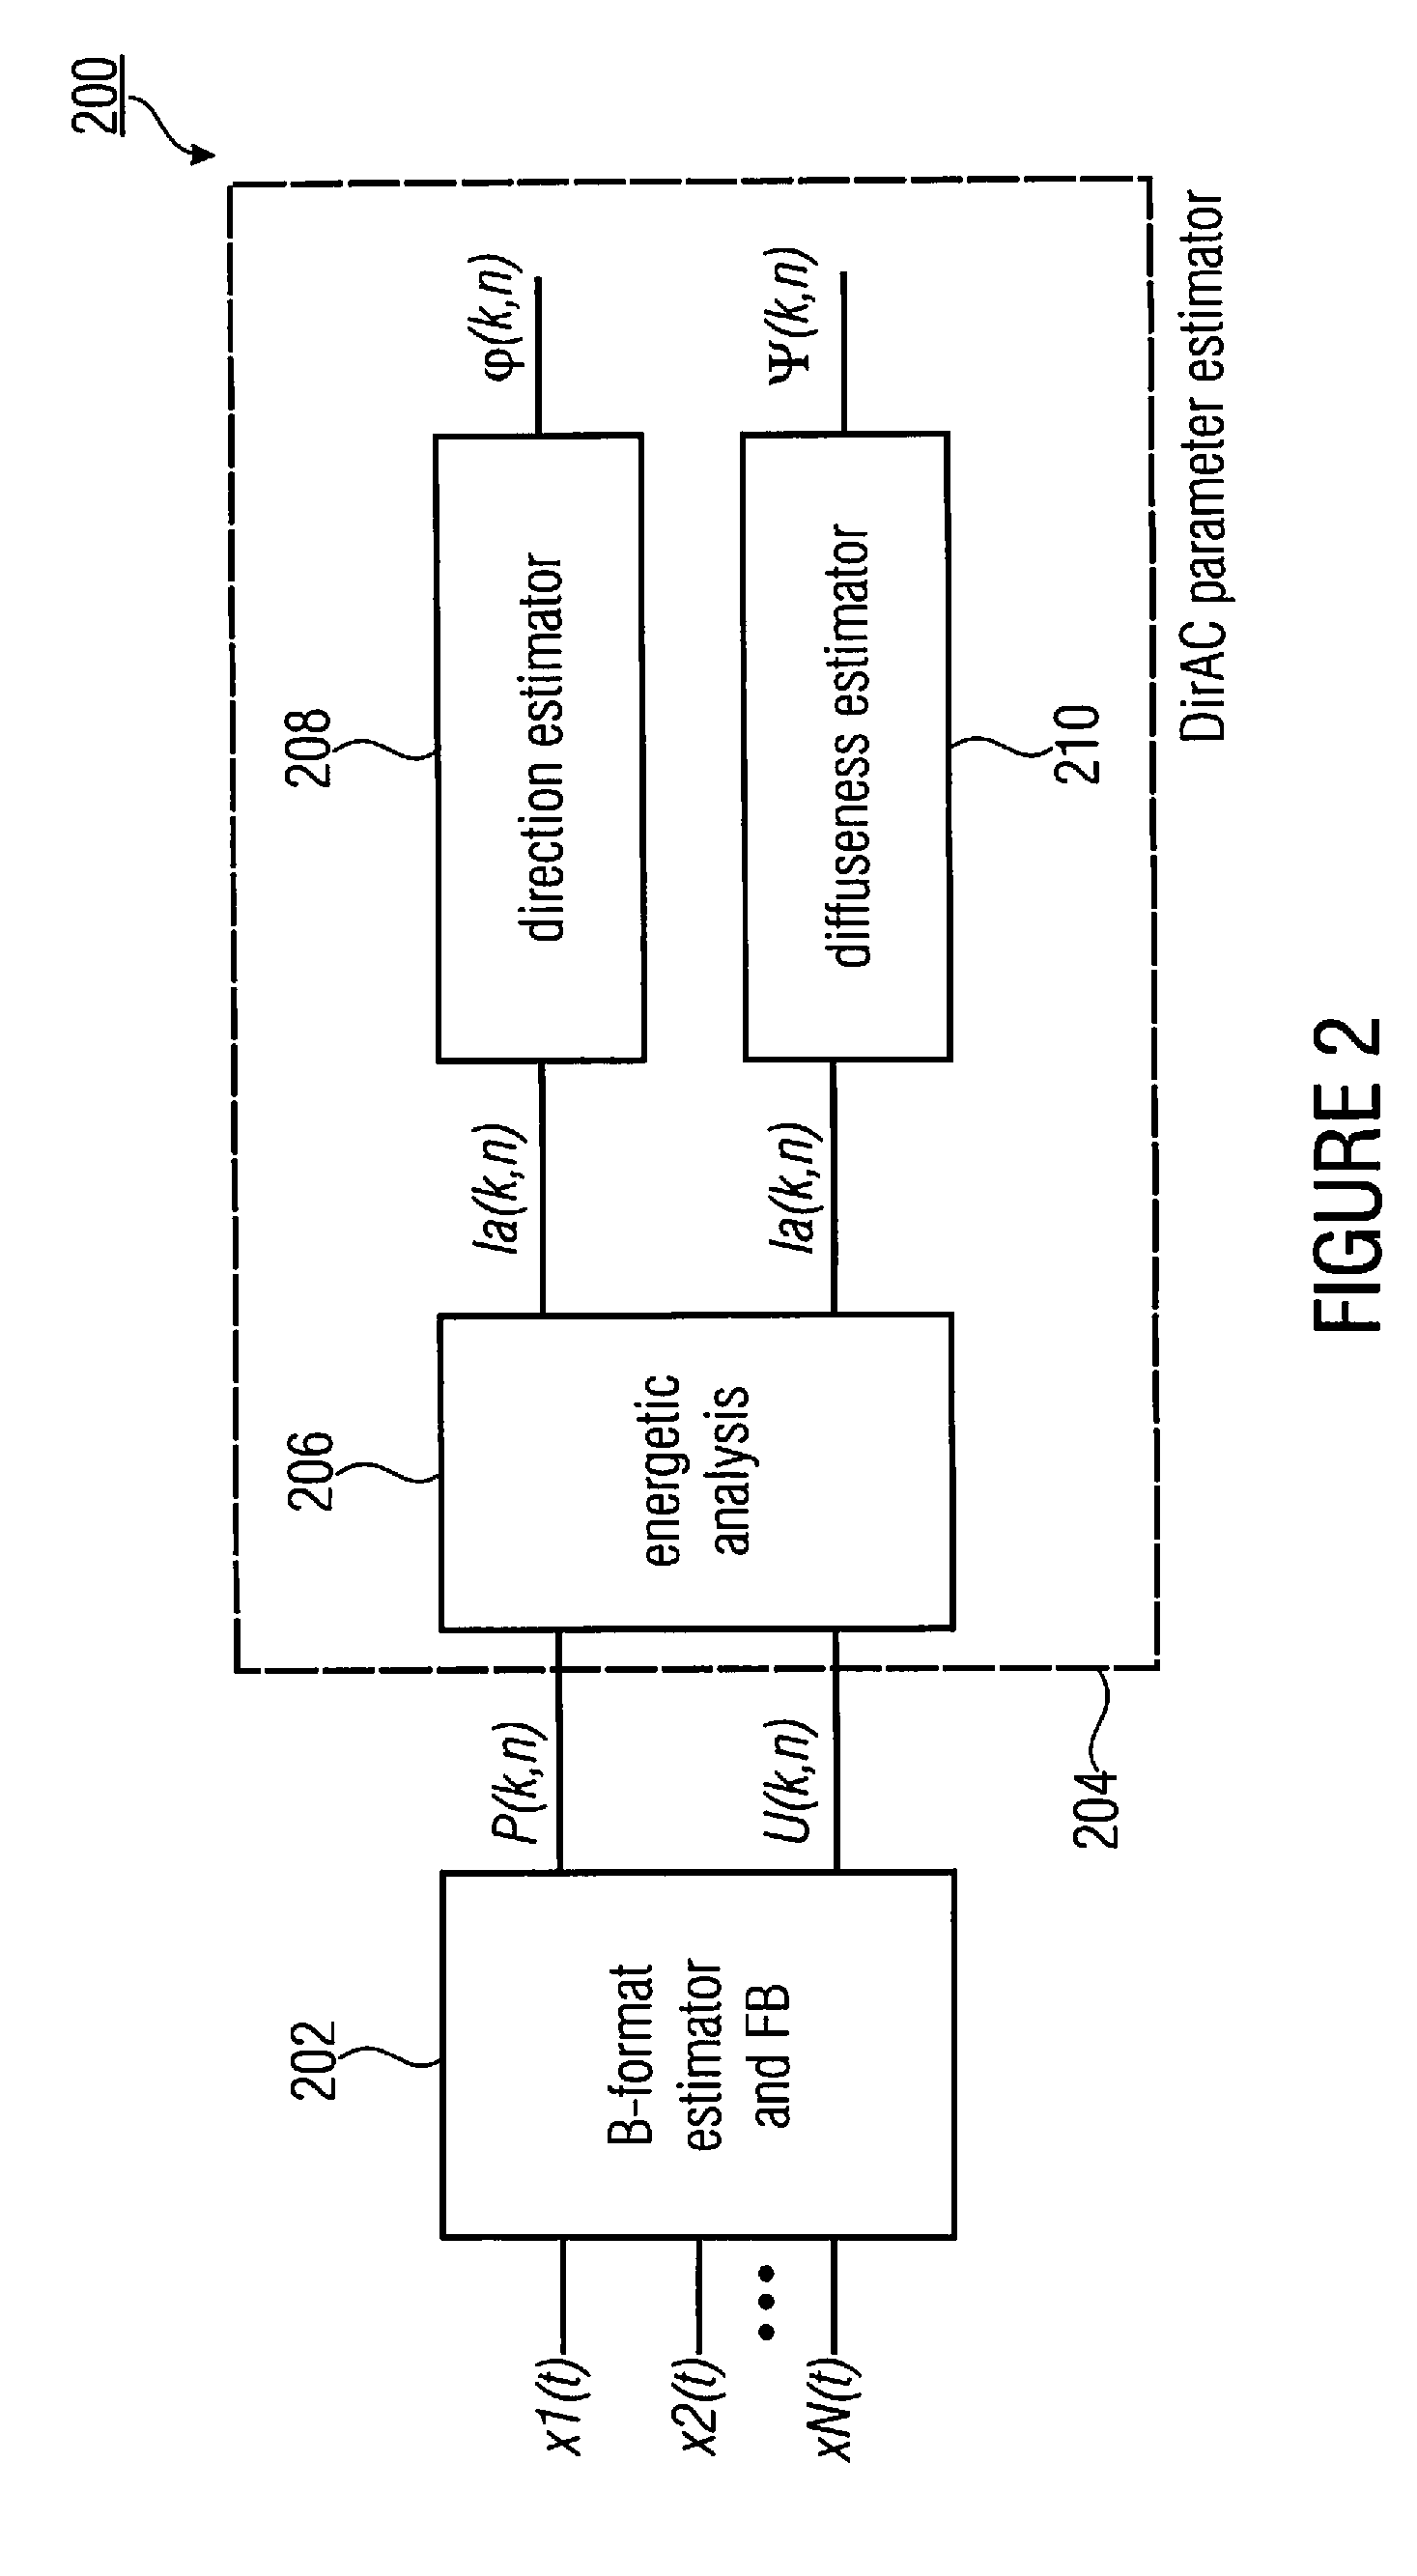 Spatial audio processor and a method for providing spatial parameters based on an acoustic input signal